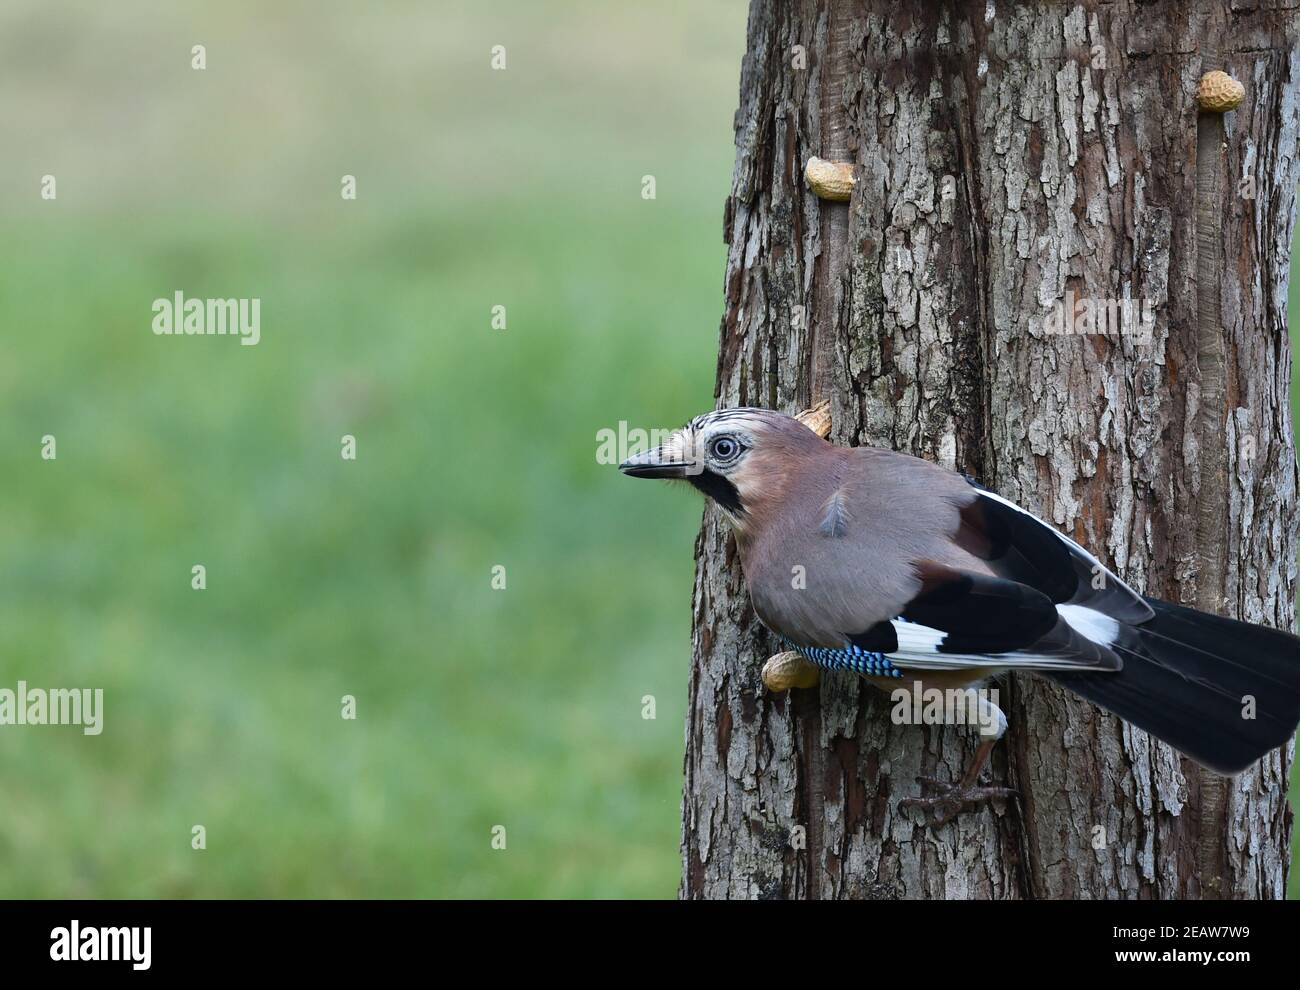 Jay collects peanuts on a tree trunk Stock Photo